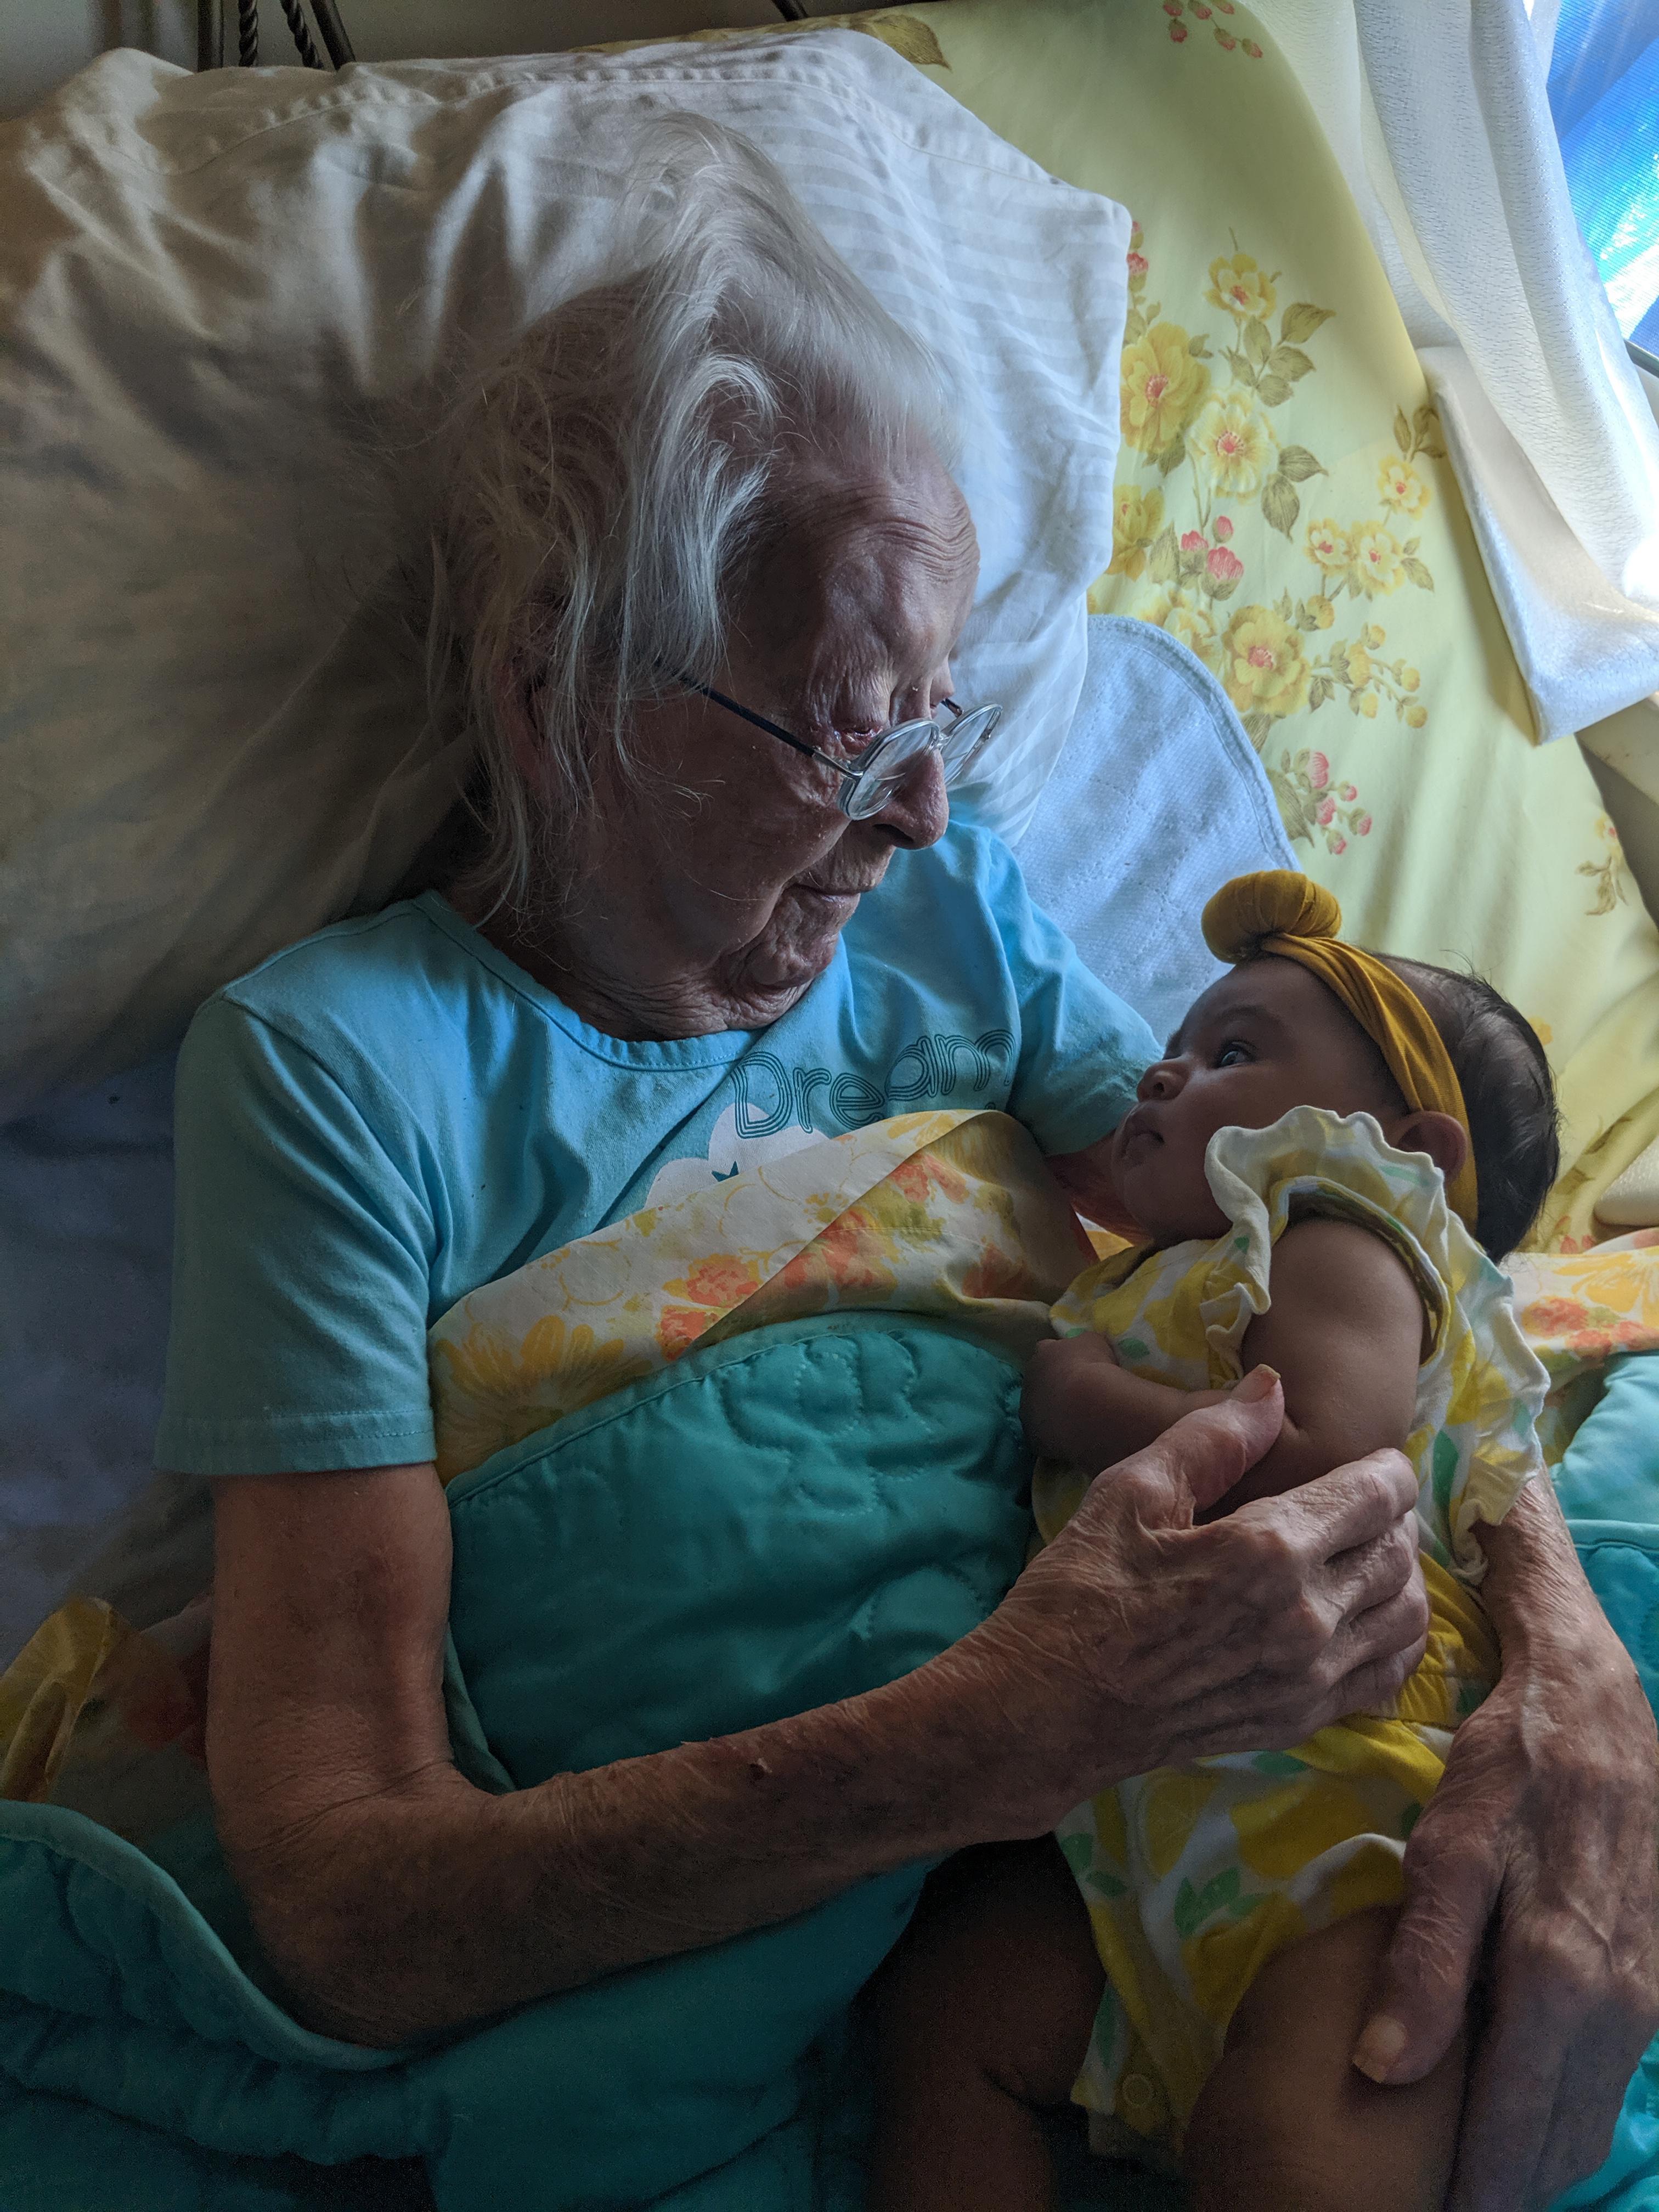 My daughter is 2 months old and her great great grandma 104 years old today.